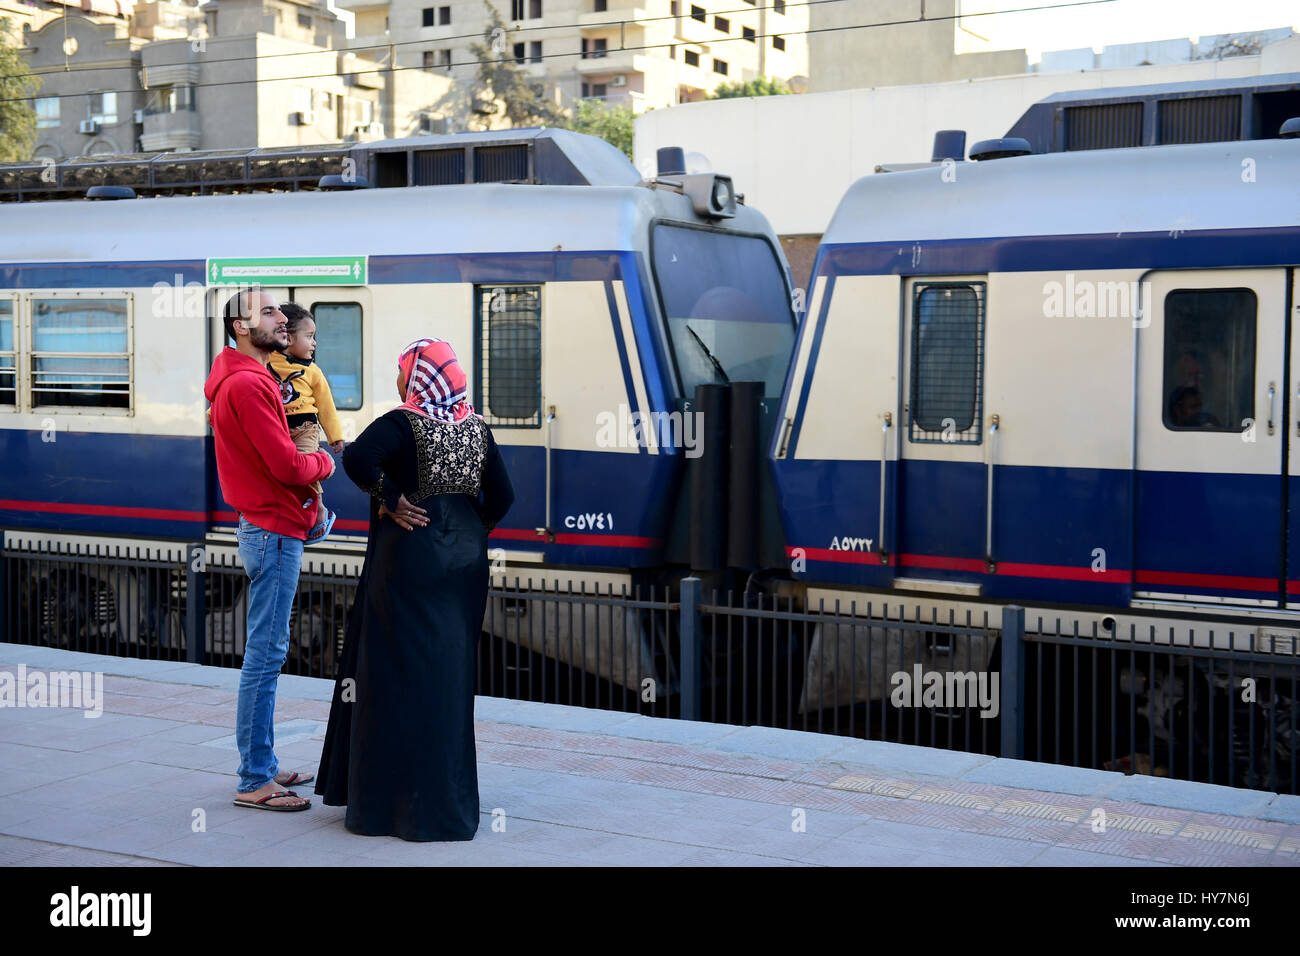 Cairo. 31st Mar, 2017. Passengers wait for the metro train at Maadi metro station in Cairo, Egypt on March 31, 2017. Egypt has doubled Cairo metro fare amid financial difficulties and nearly 3.5 million commuters relying on Cairo's metro everyday fumed by the move, as they already suffered sharp rise in living costs. Credit: Zhao Dingzhe/Xinhua/Alamy Live News Stock Photo